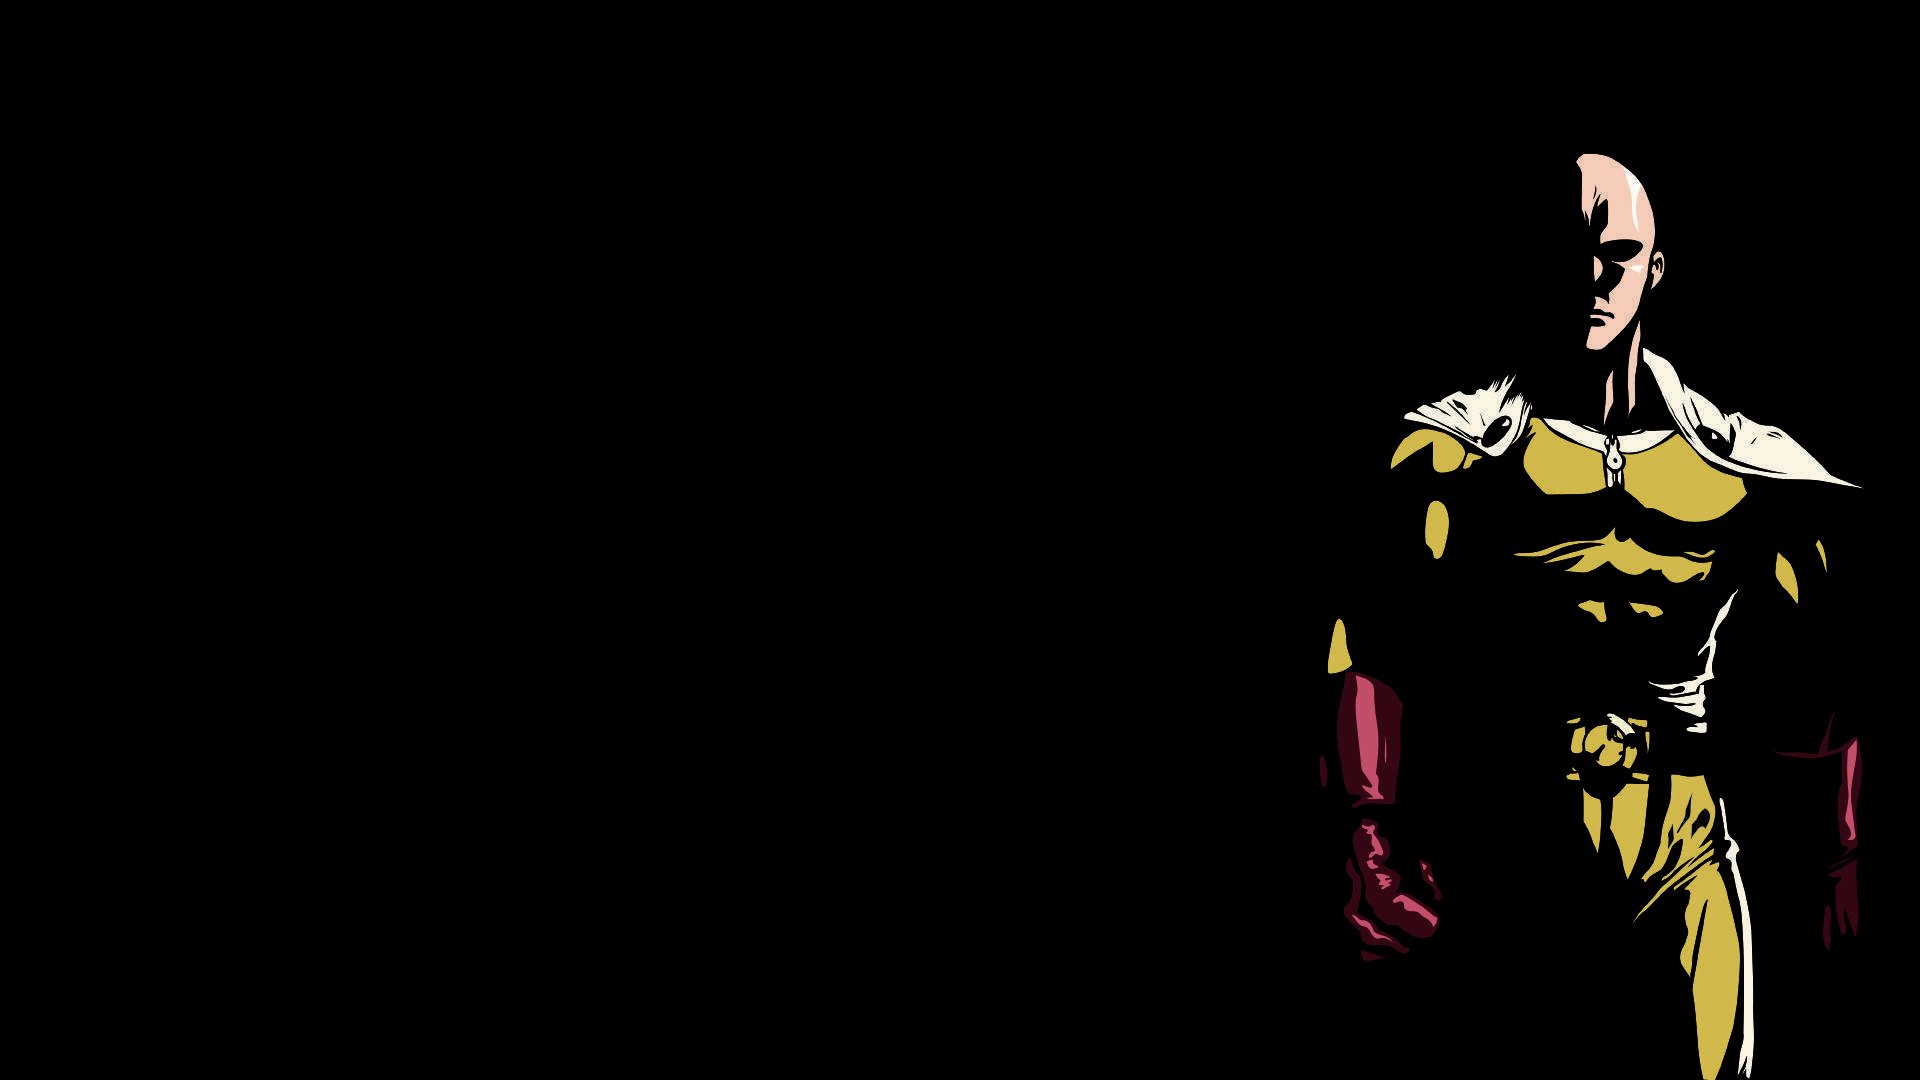 One punch background, I made for my pc wallpaper. How did I do